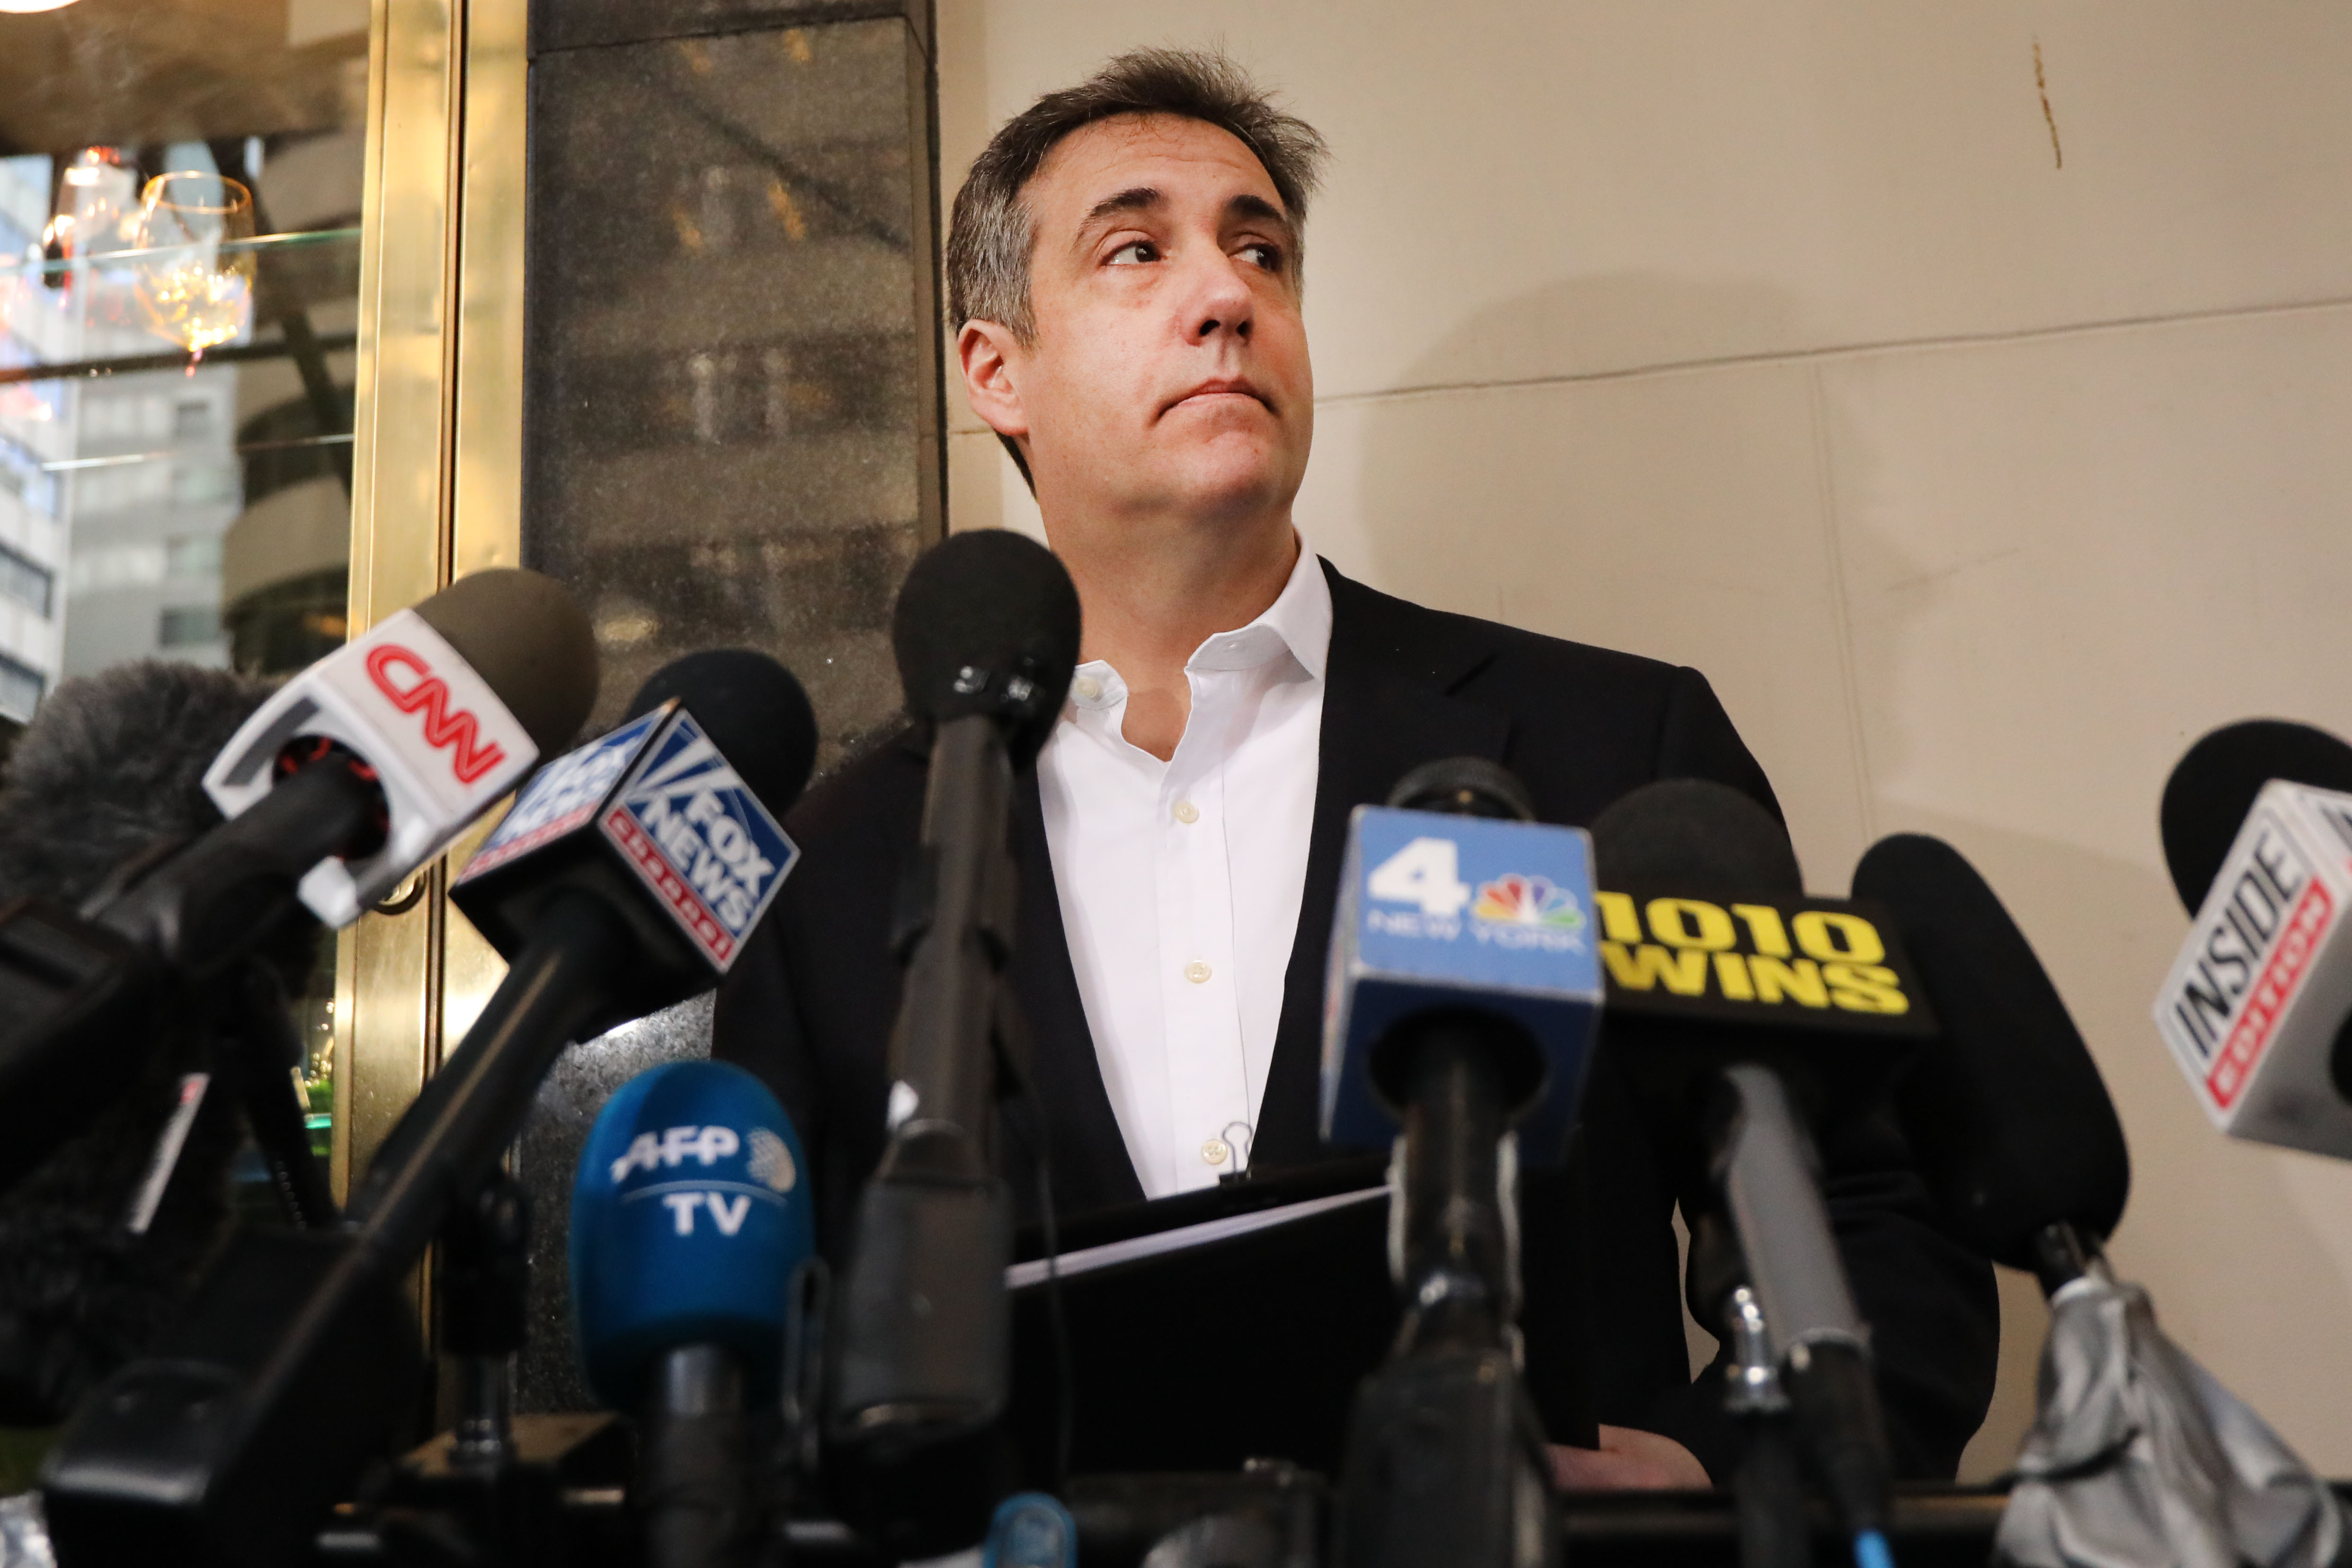 Michael Cohen, the former personal attorney to President Donald Trump, speaks to the media before departing his Manhattan apartment for prison on May 06, 2019 in New York City. (Spencer Platt/Getty Images)